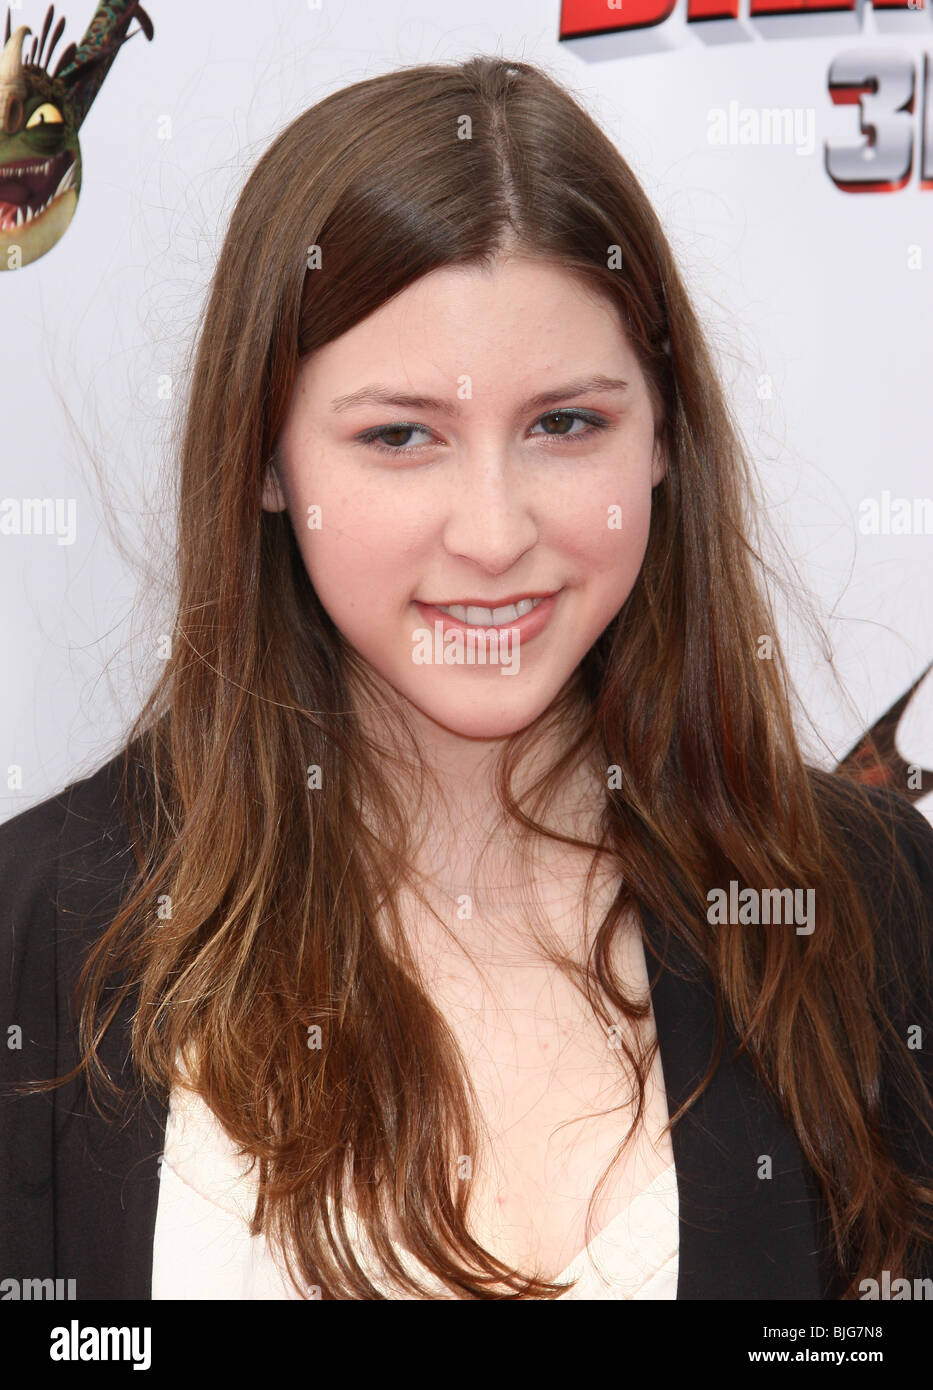 EDEN SHER HOW TO TRAIN YOUR DRAGON LOS ANGELES PREMIERE LOS